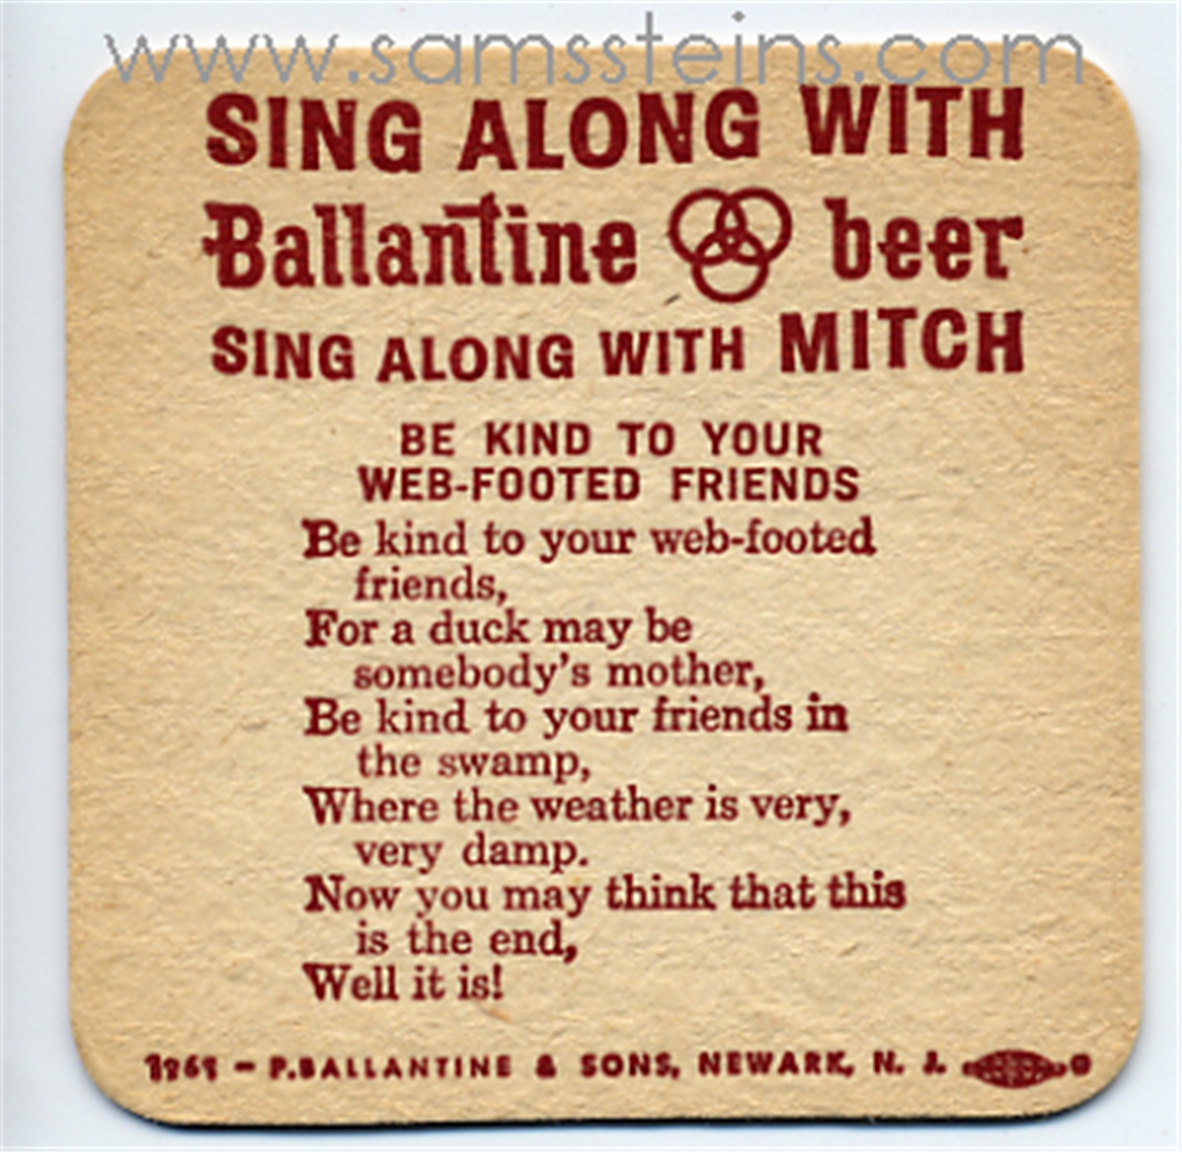 Ballantine Sing Along Web Footed Friend Beer Coaster